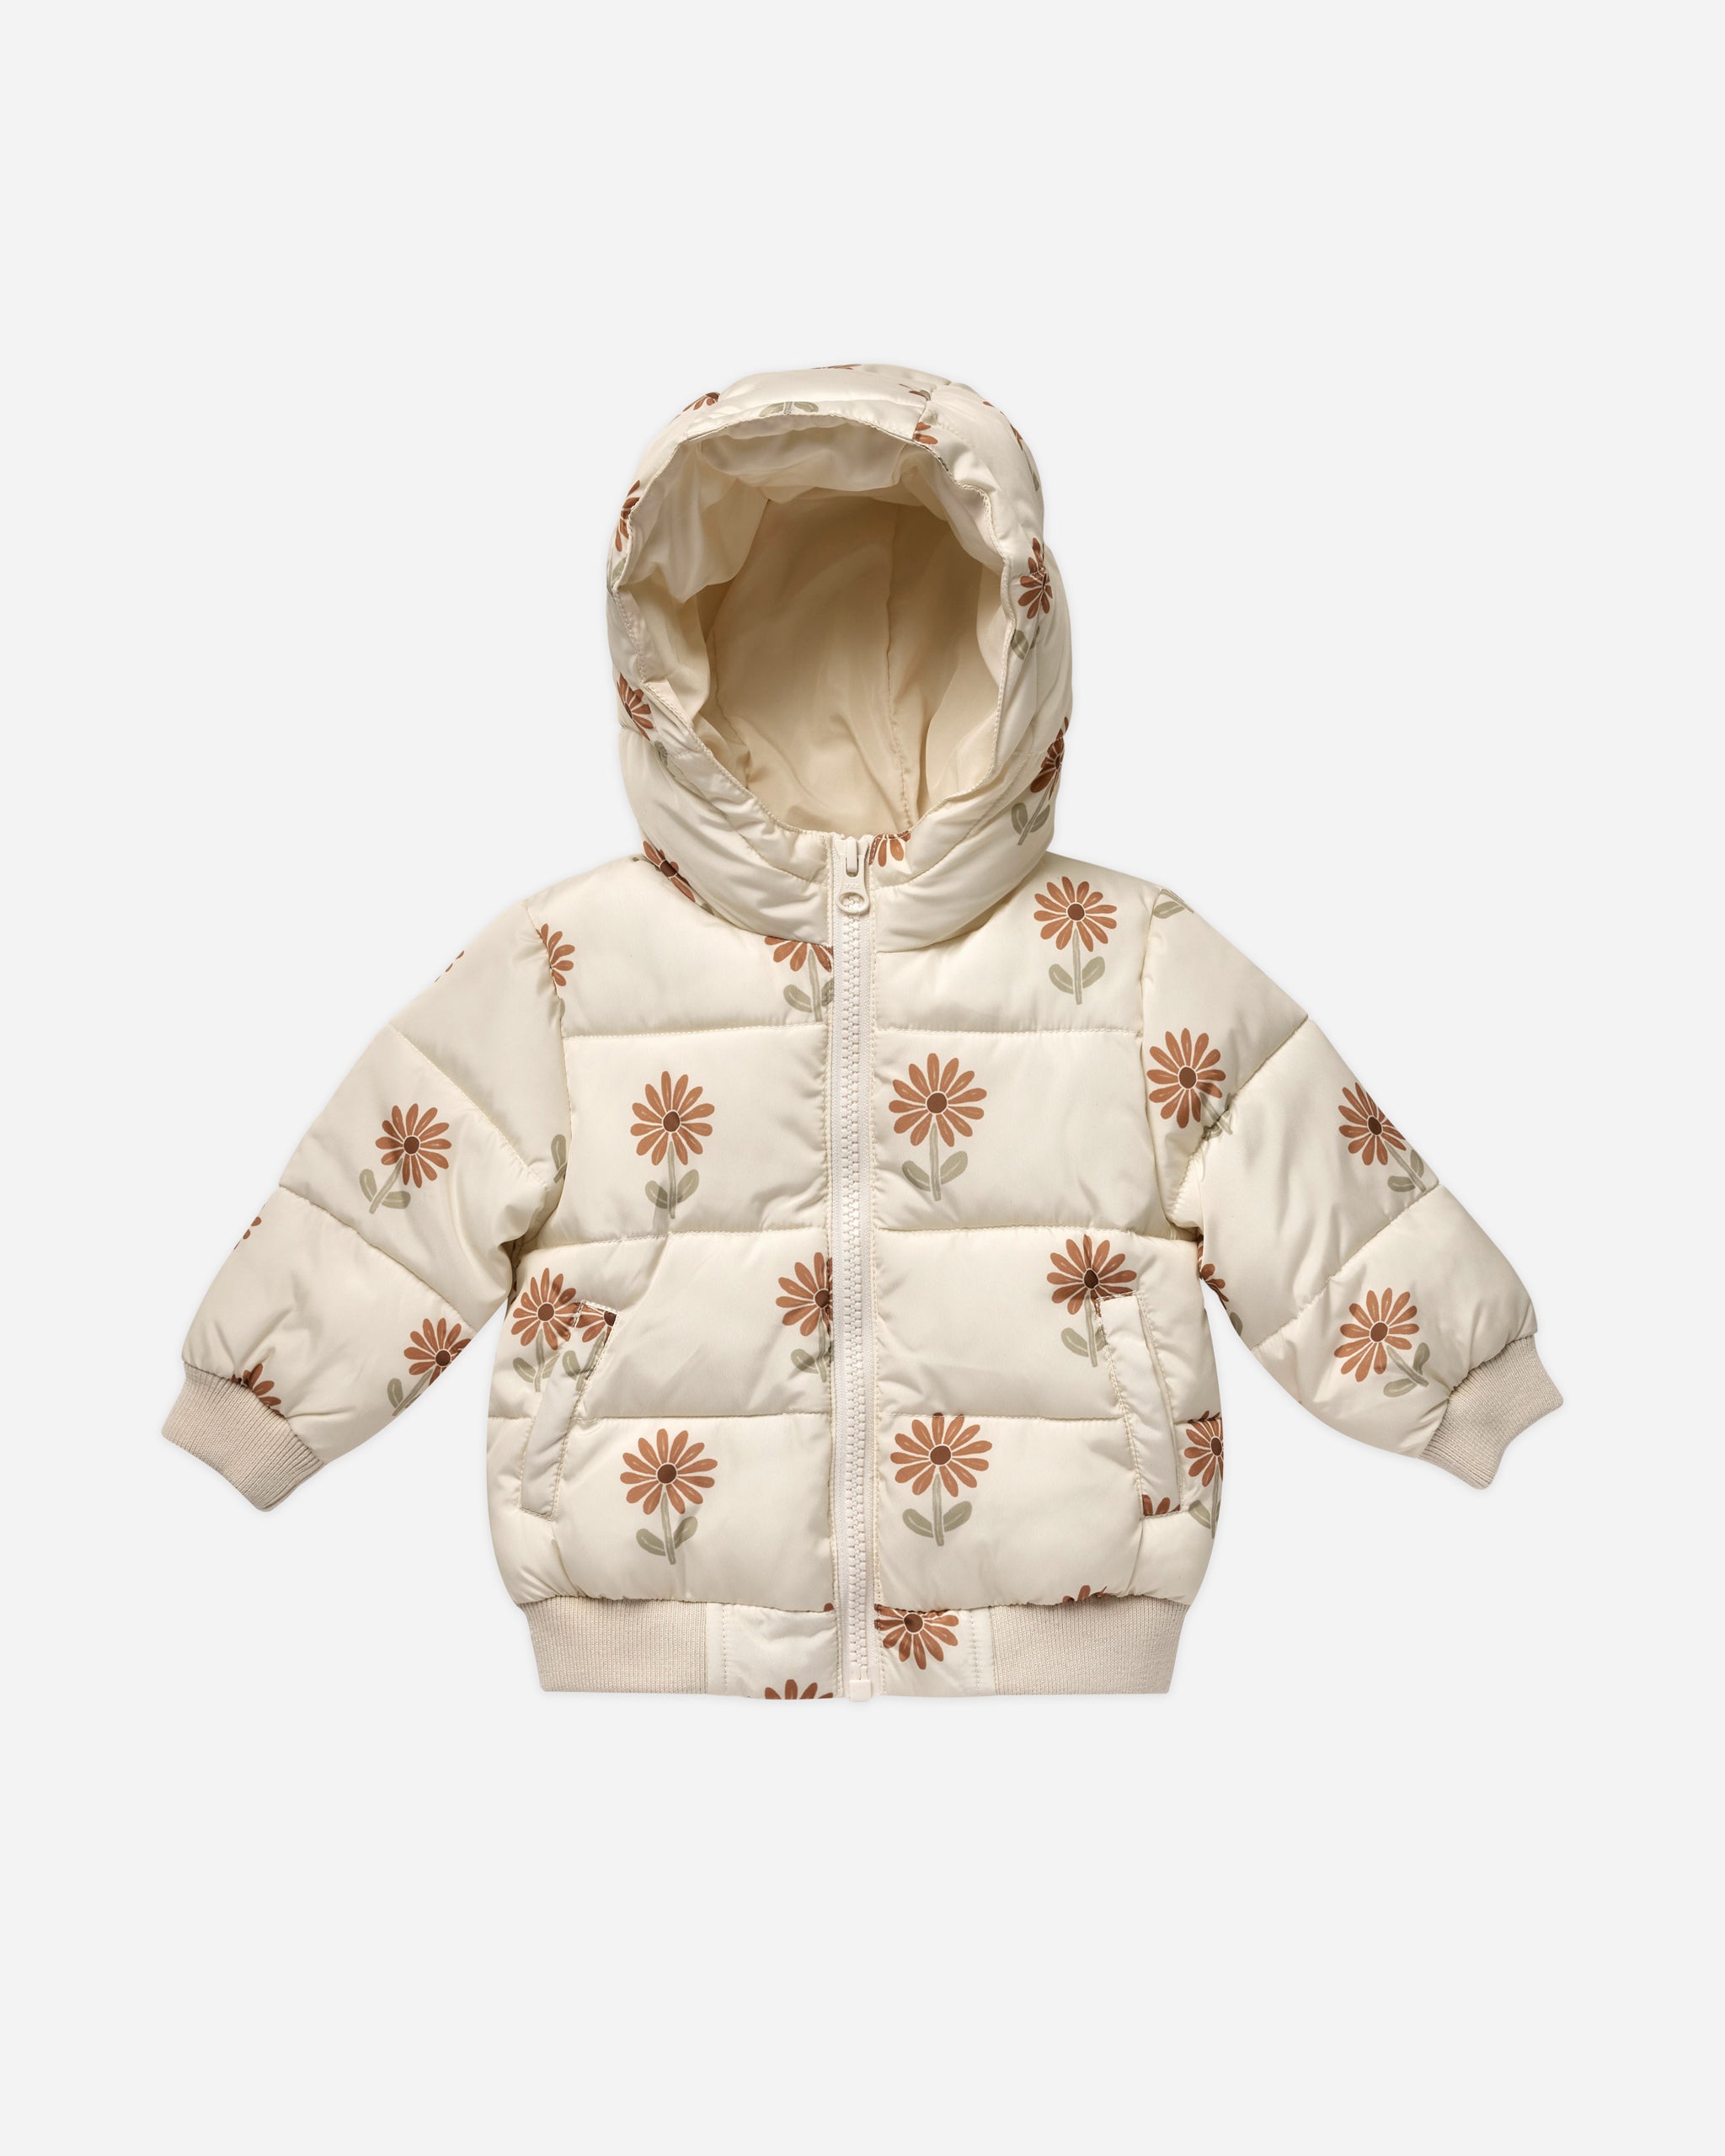 Long Chore Coat || Blossom Embroidery, 6-7Y at Rylee + Cru